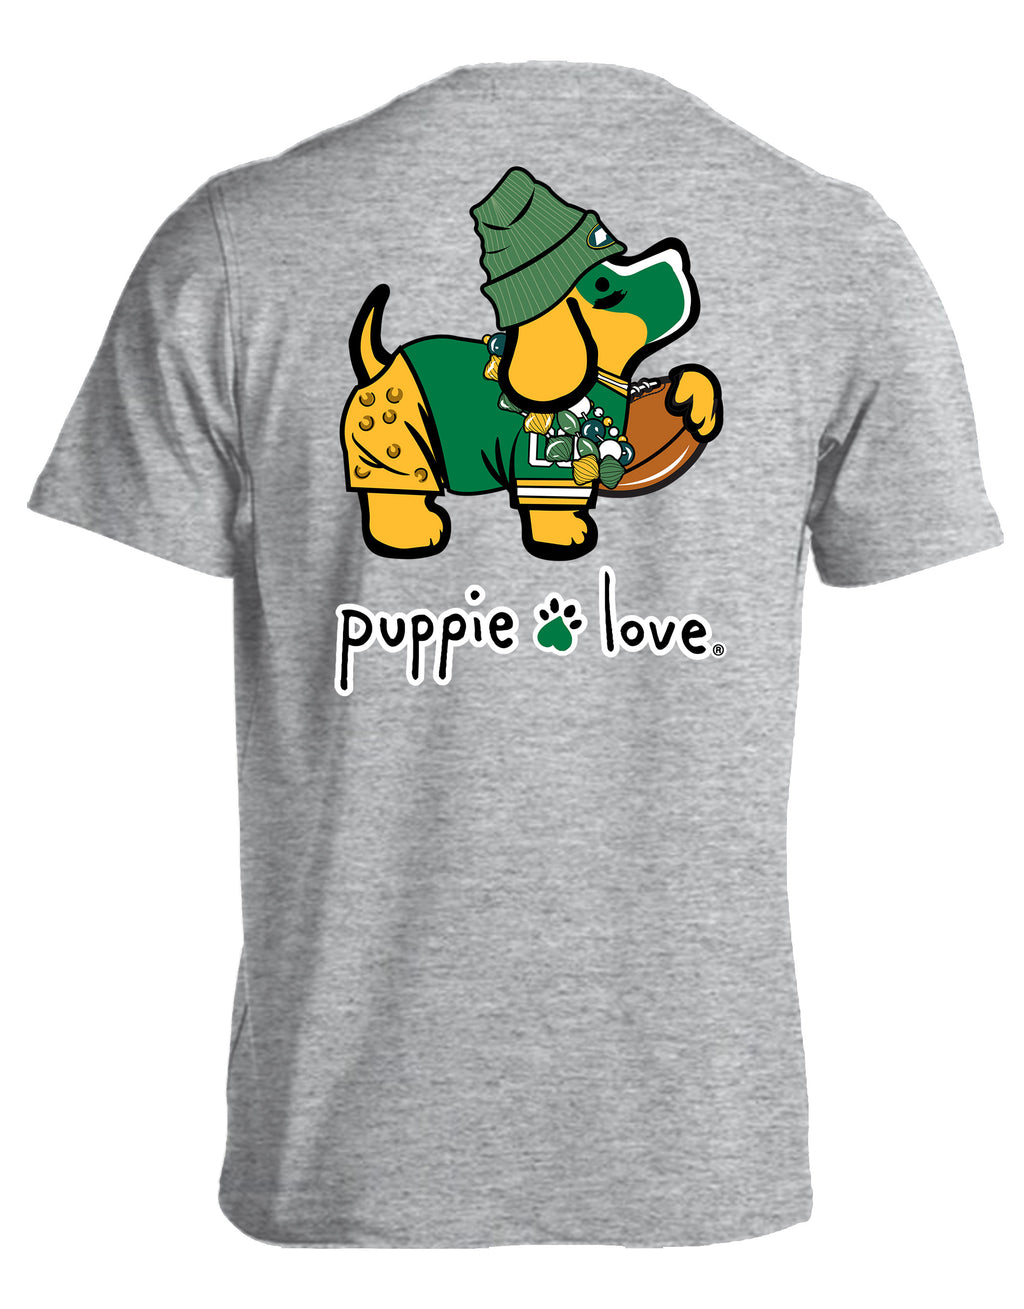 GREEN AND YELLOW MASCOT PUP - Puppie Love